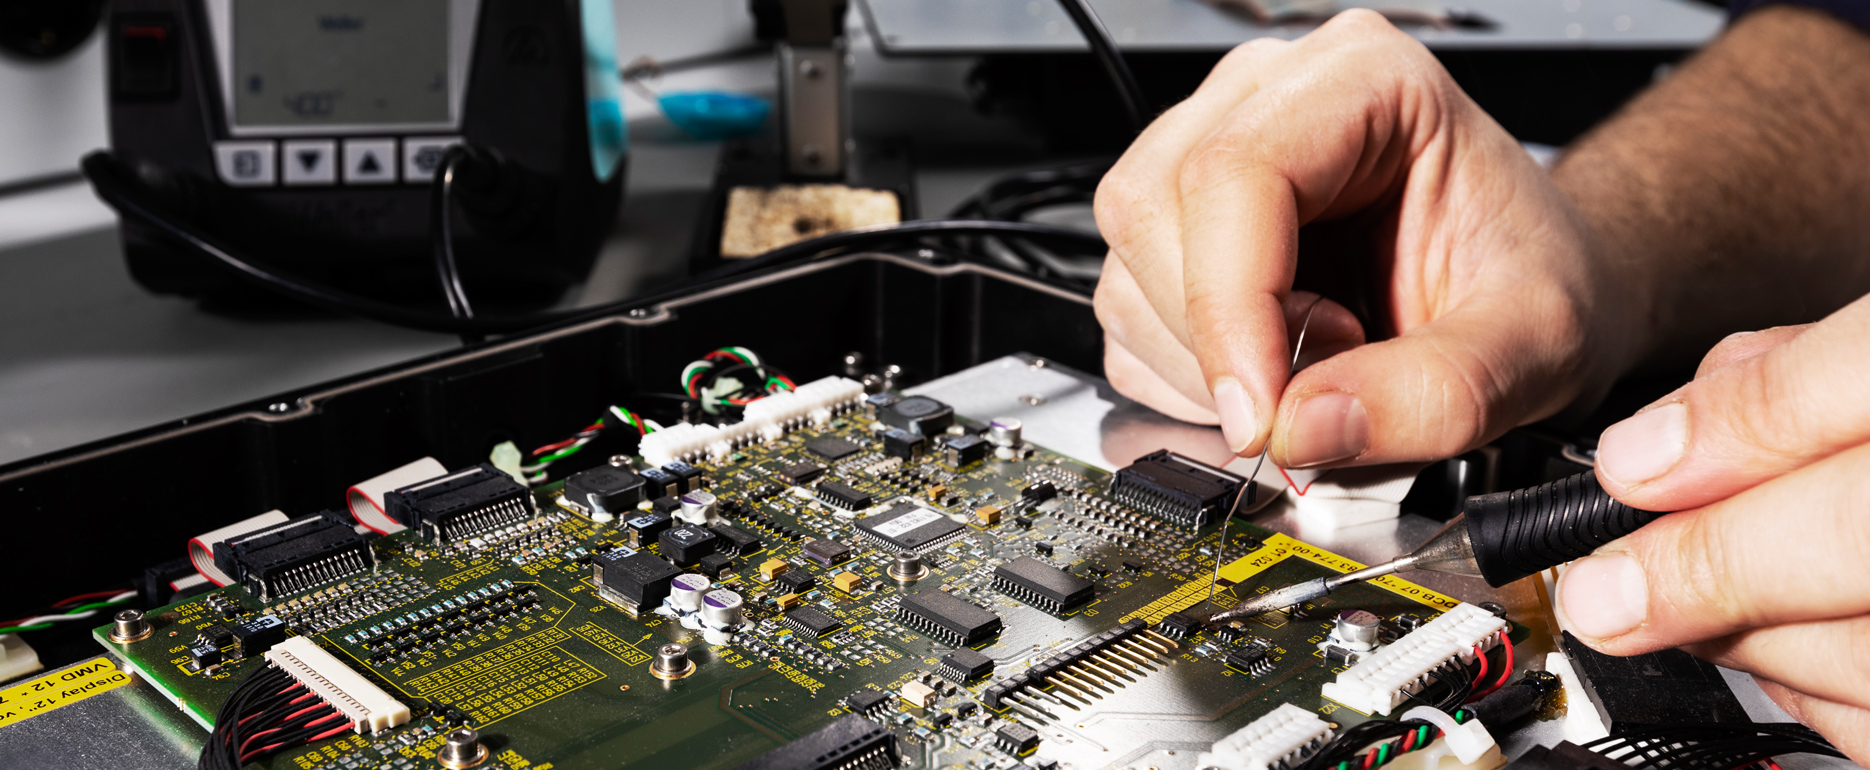 Hardware developer checking the circuit board of an open computer